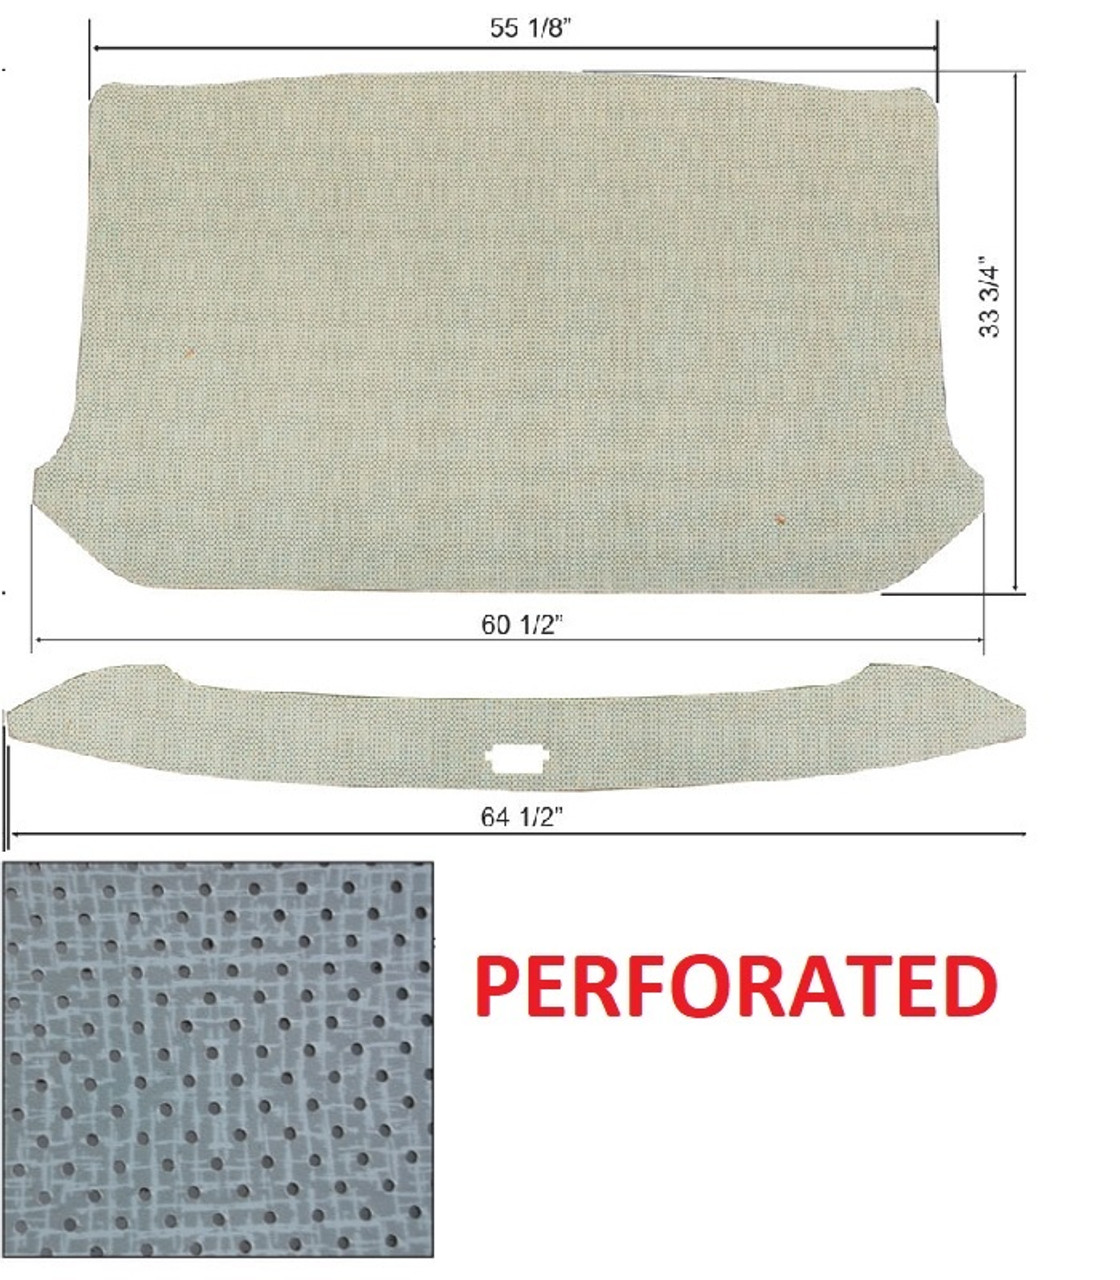 1961-64 Ford Truck Headliner, Grey, Perforated 2 pcs Kit.